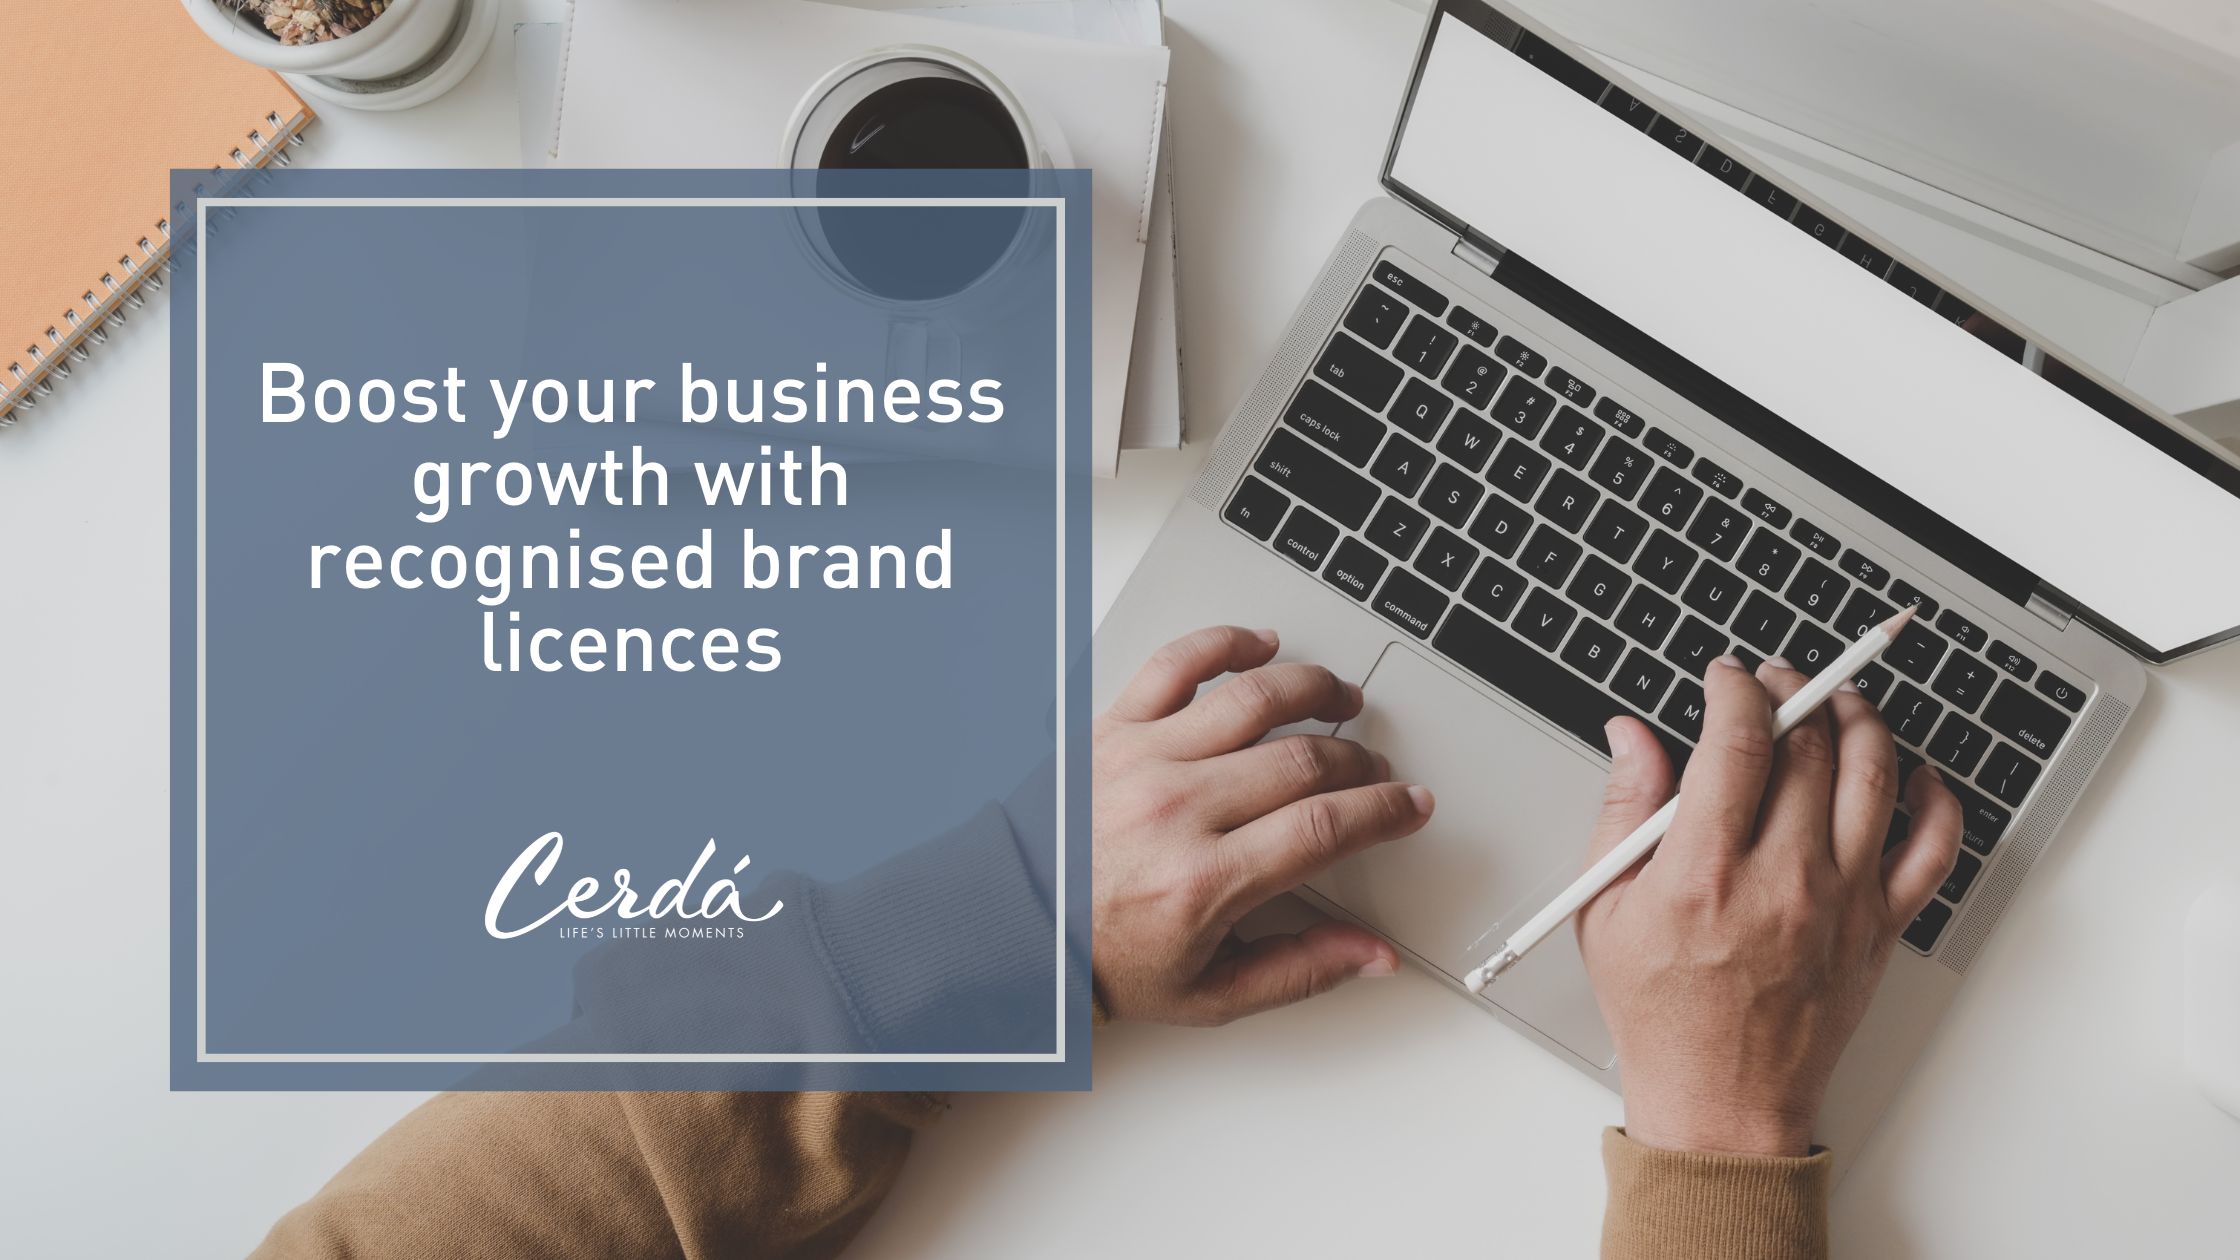 Boost your business growth with recognised brand licences